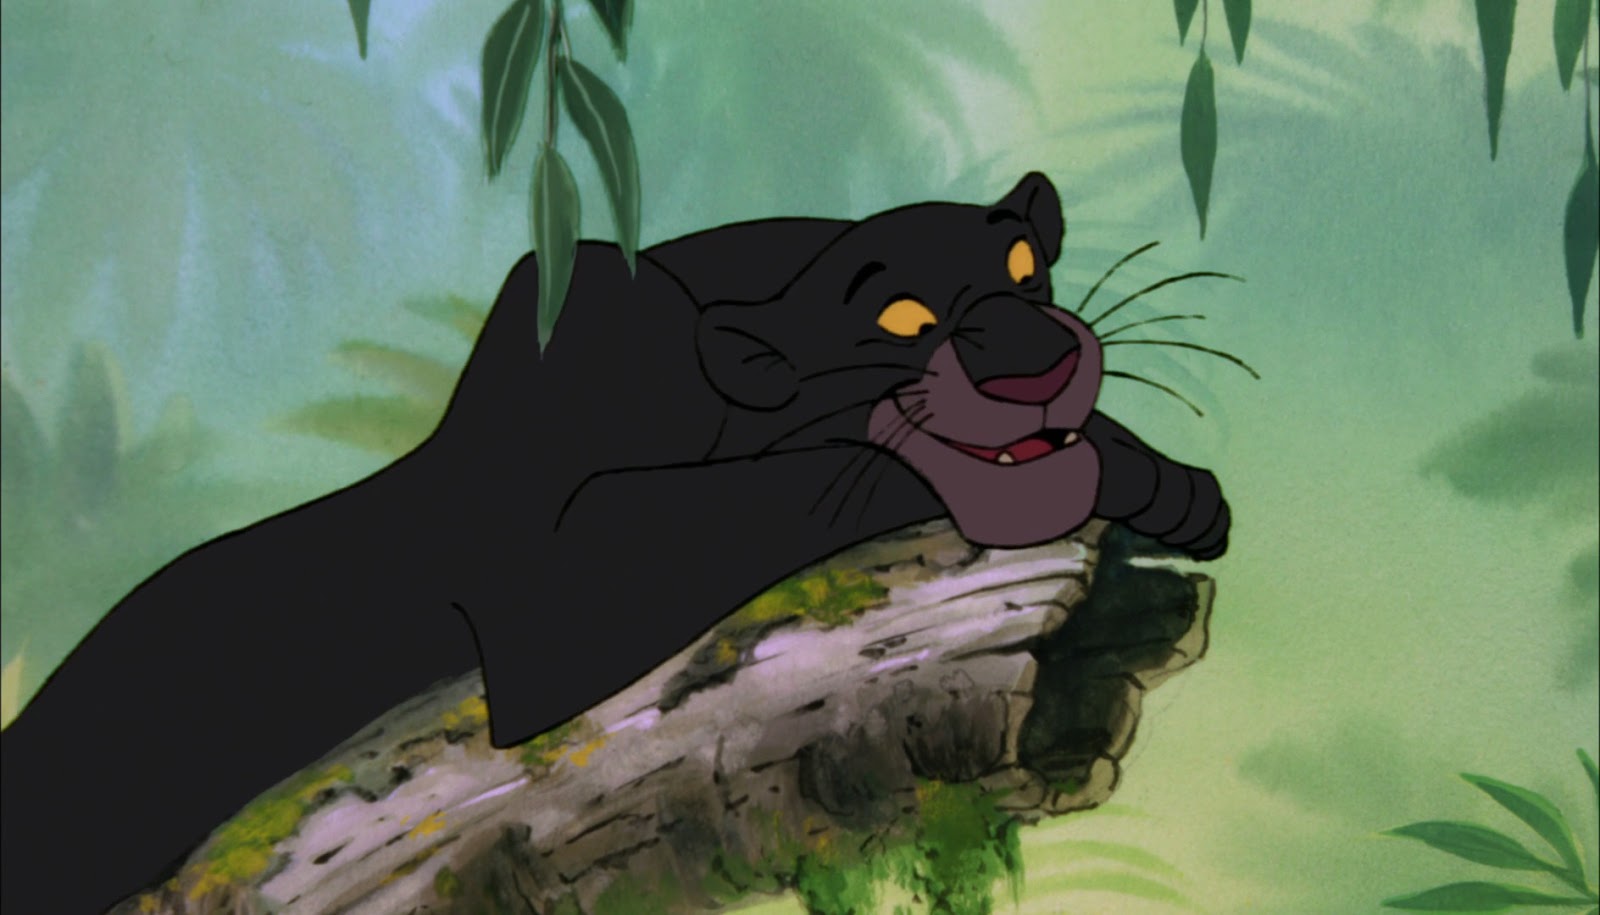 : It's time to reopen 'The Jungle Book'